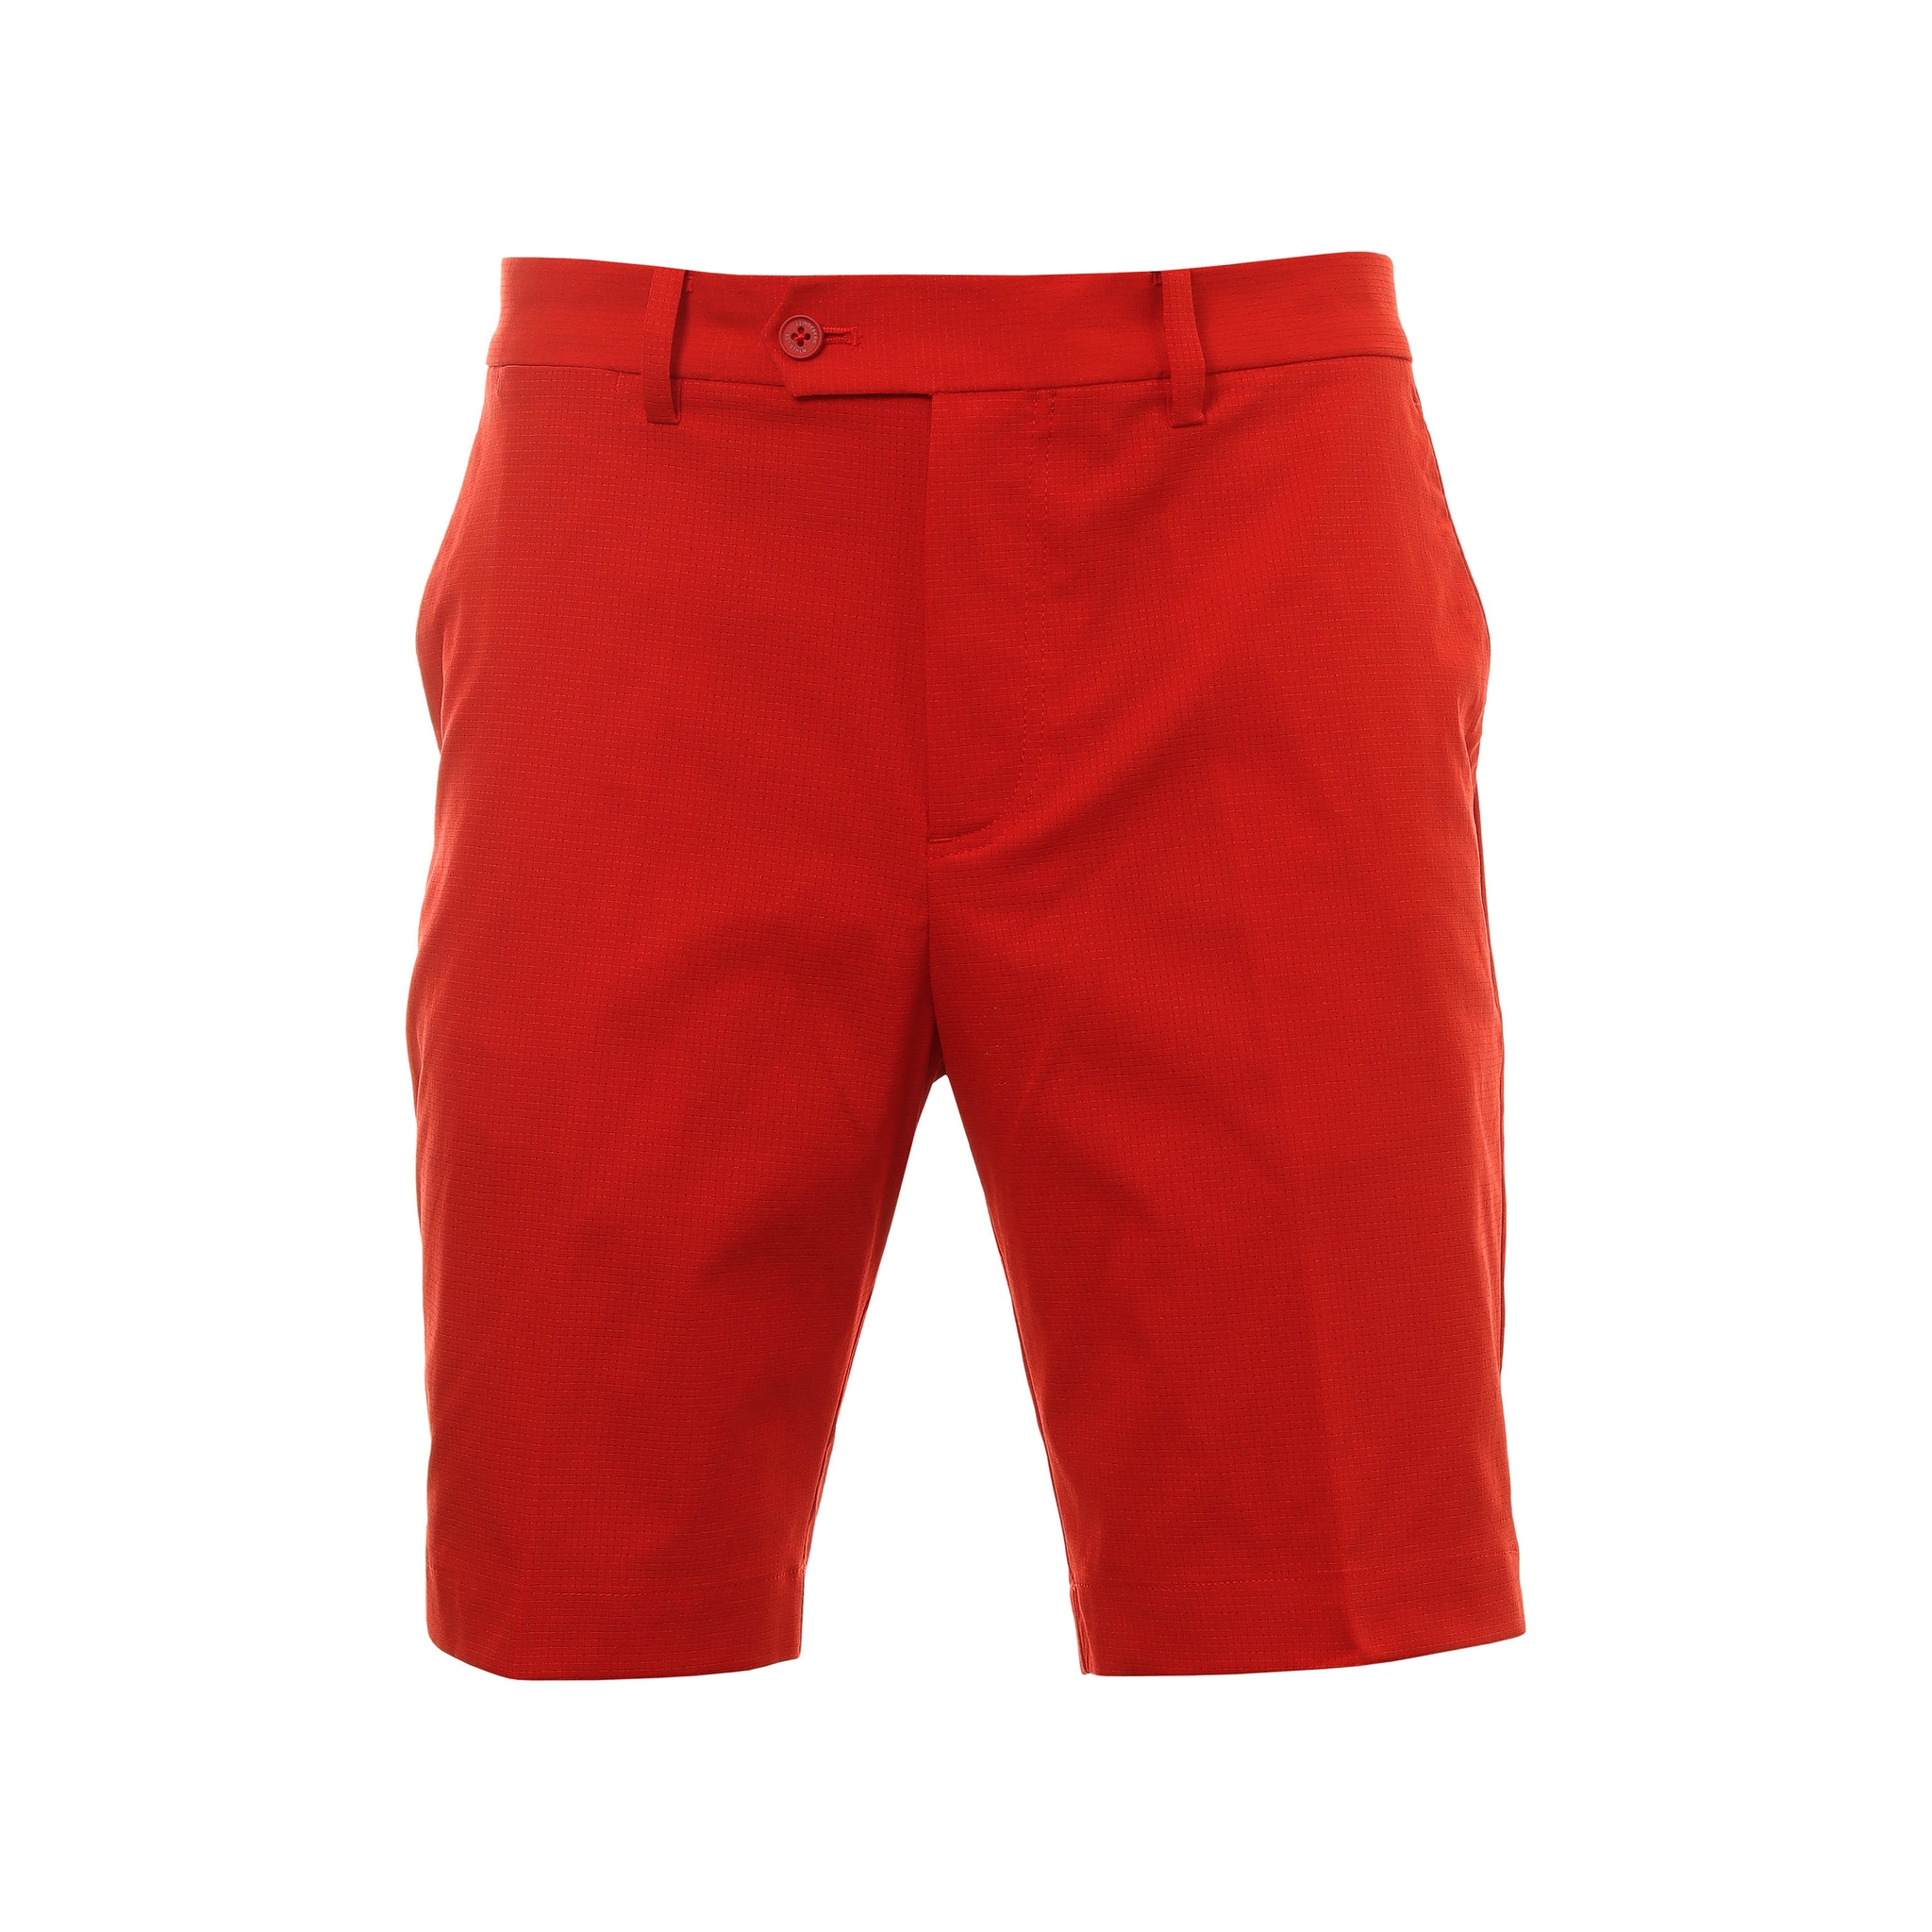 j-lindeberg-golf-vent-tight-shorts-gmpa08621-g135-fiery-red